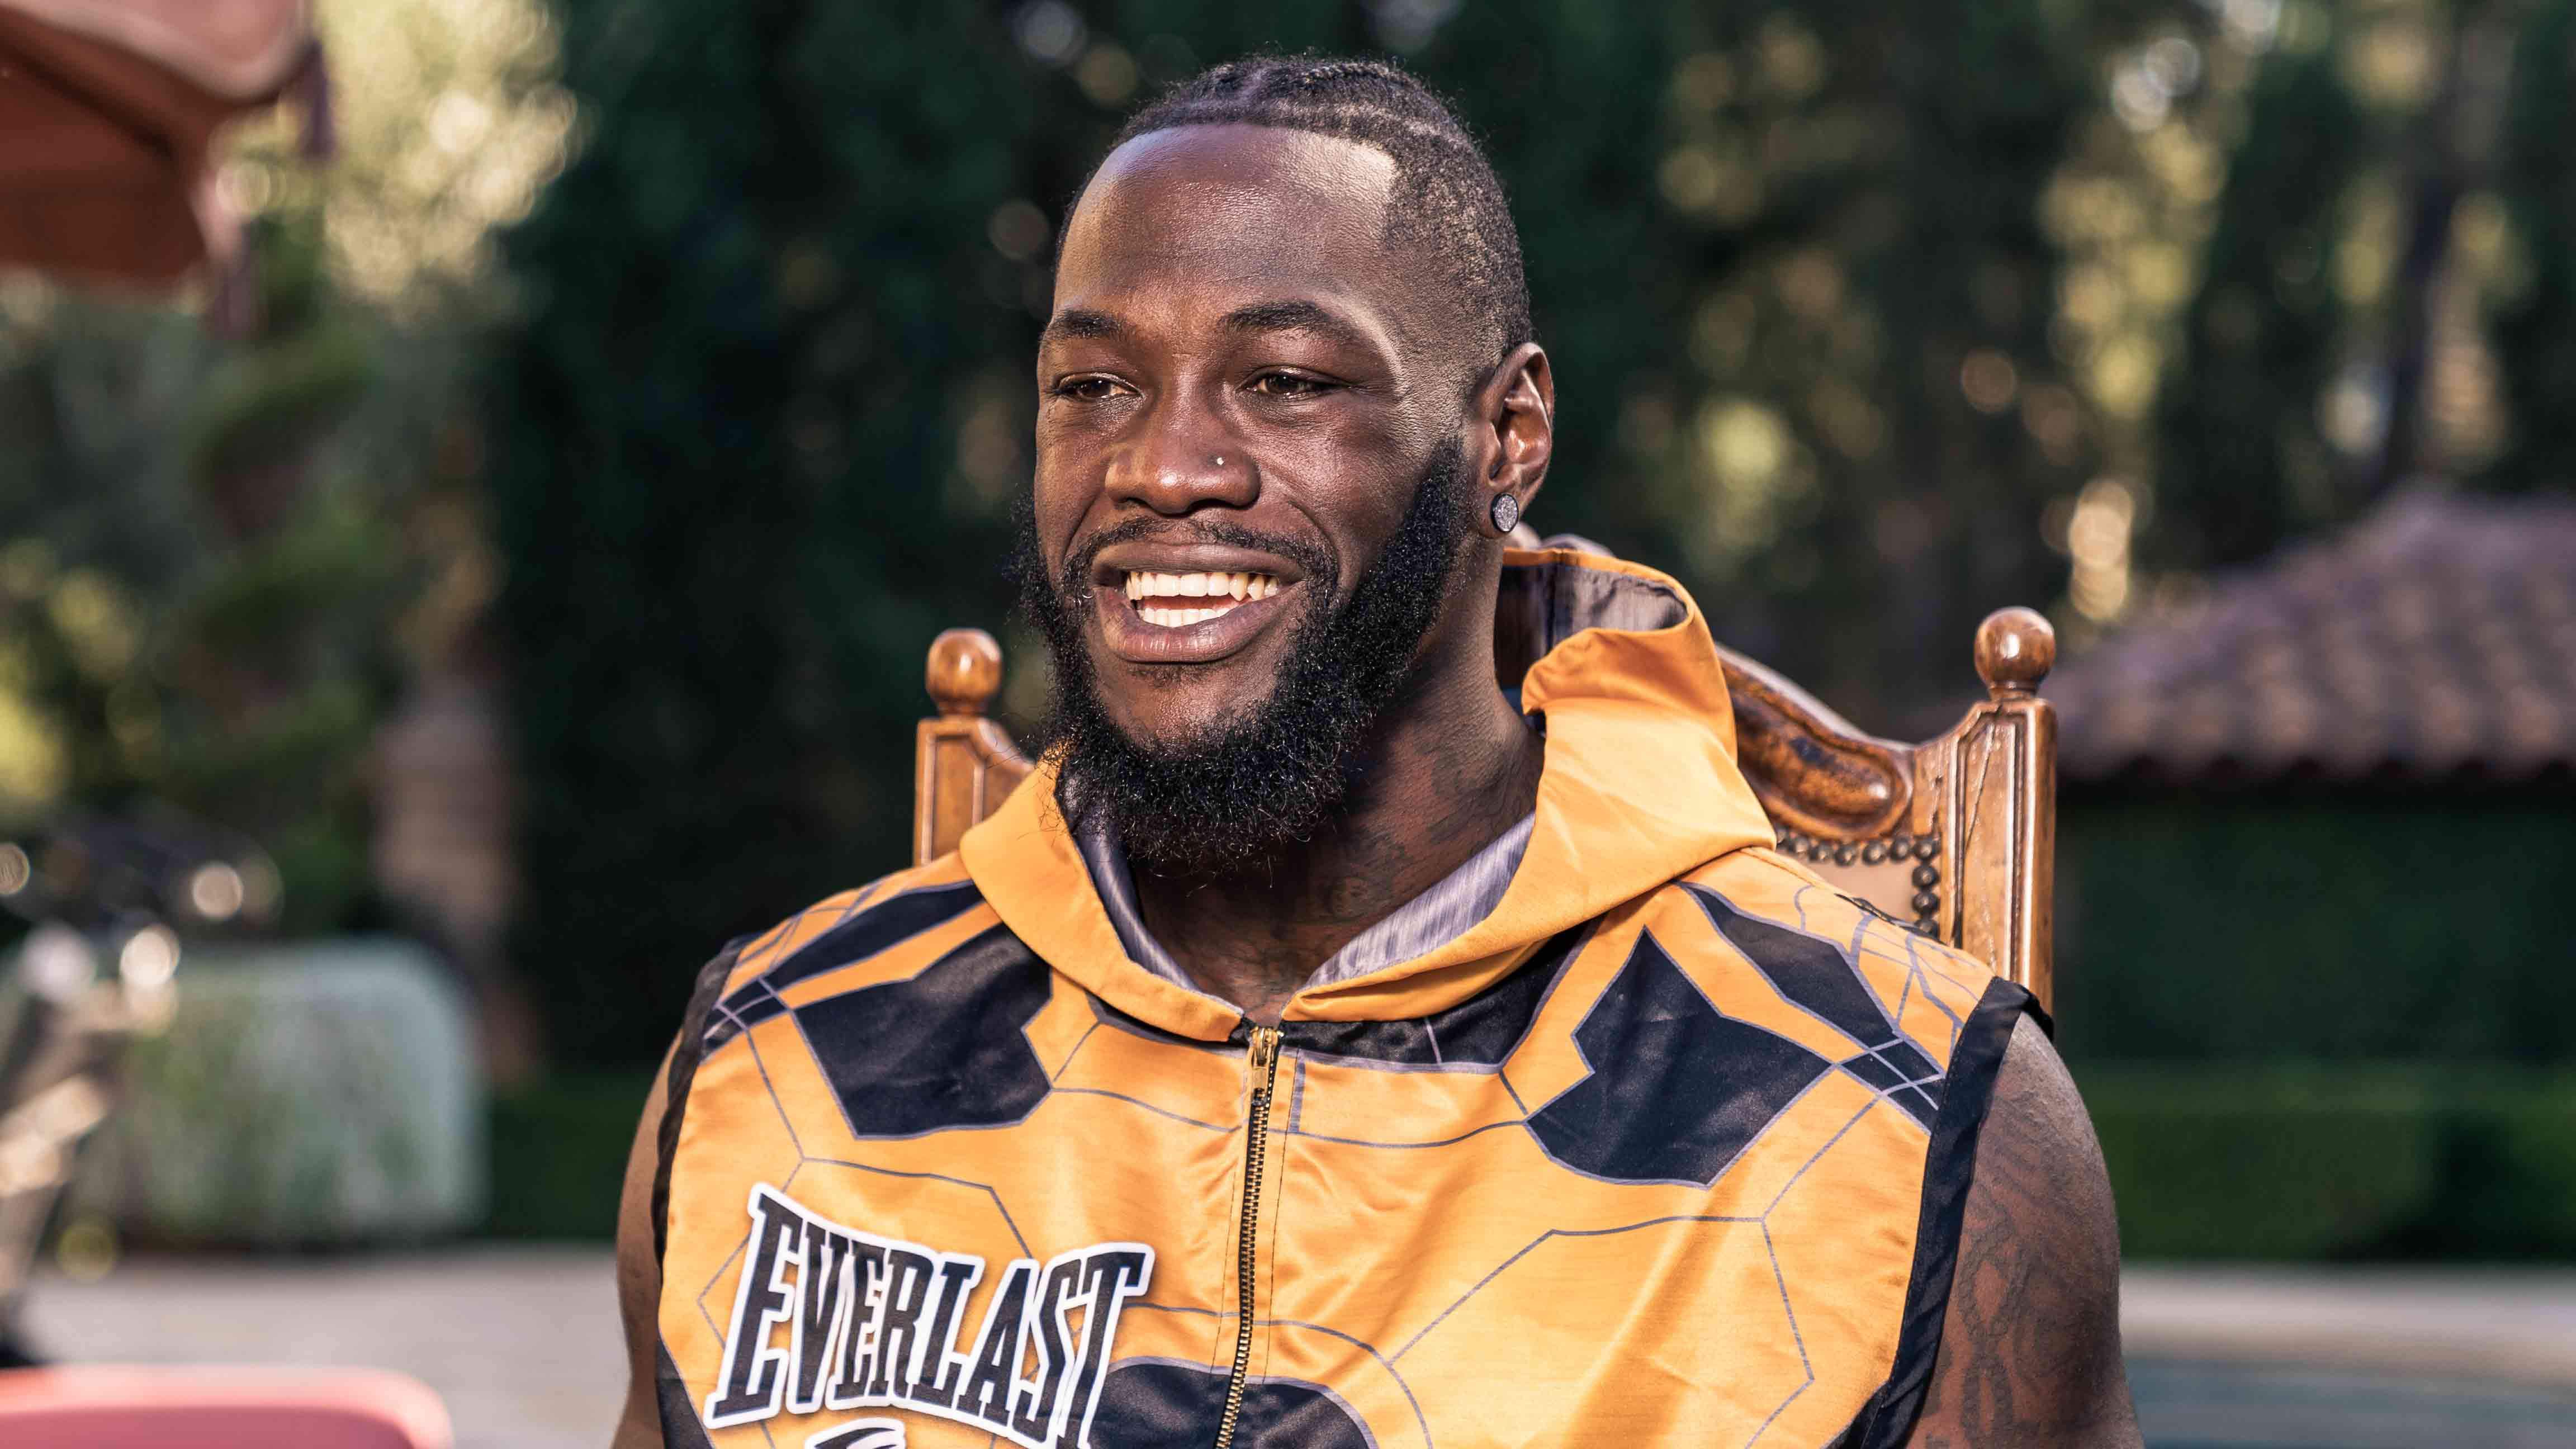 This Week on The PBC Podcast: Deontay Wilder & Anthony Dirrell - Premier Boxing Champions